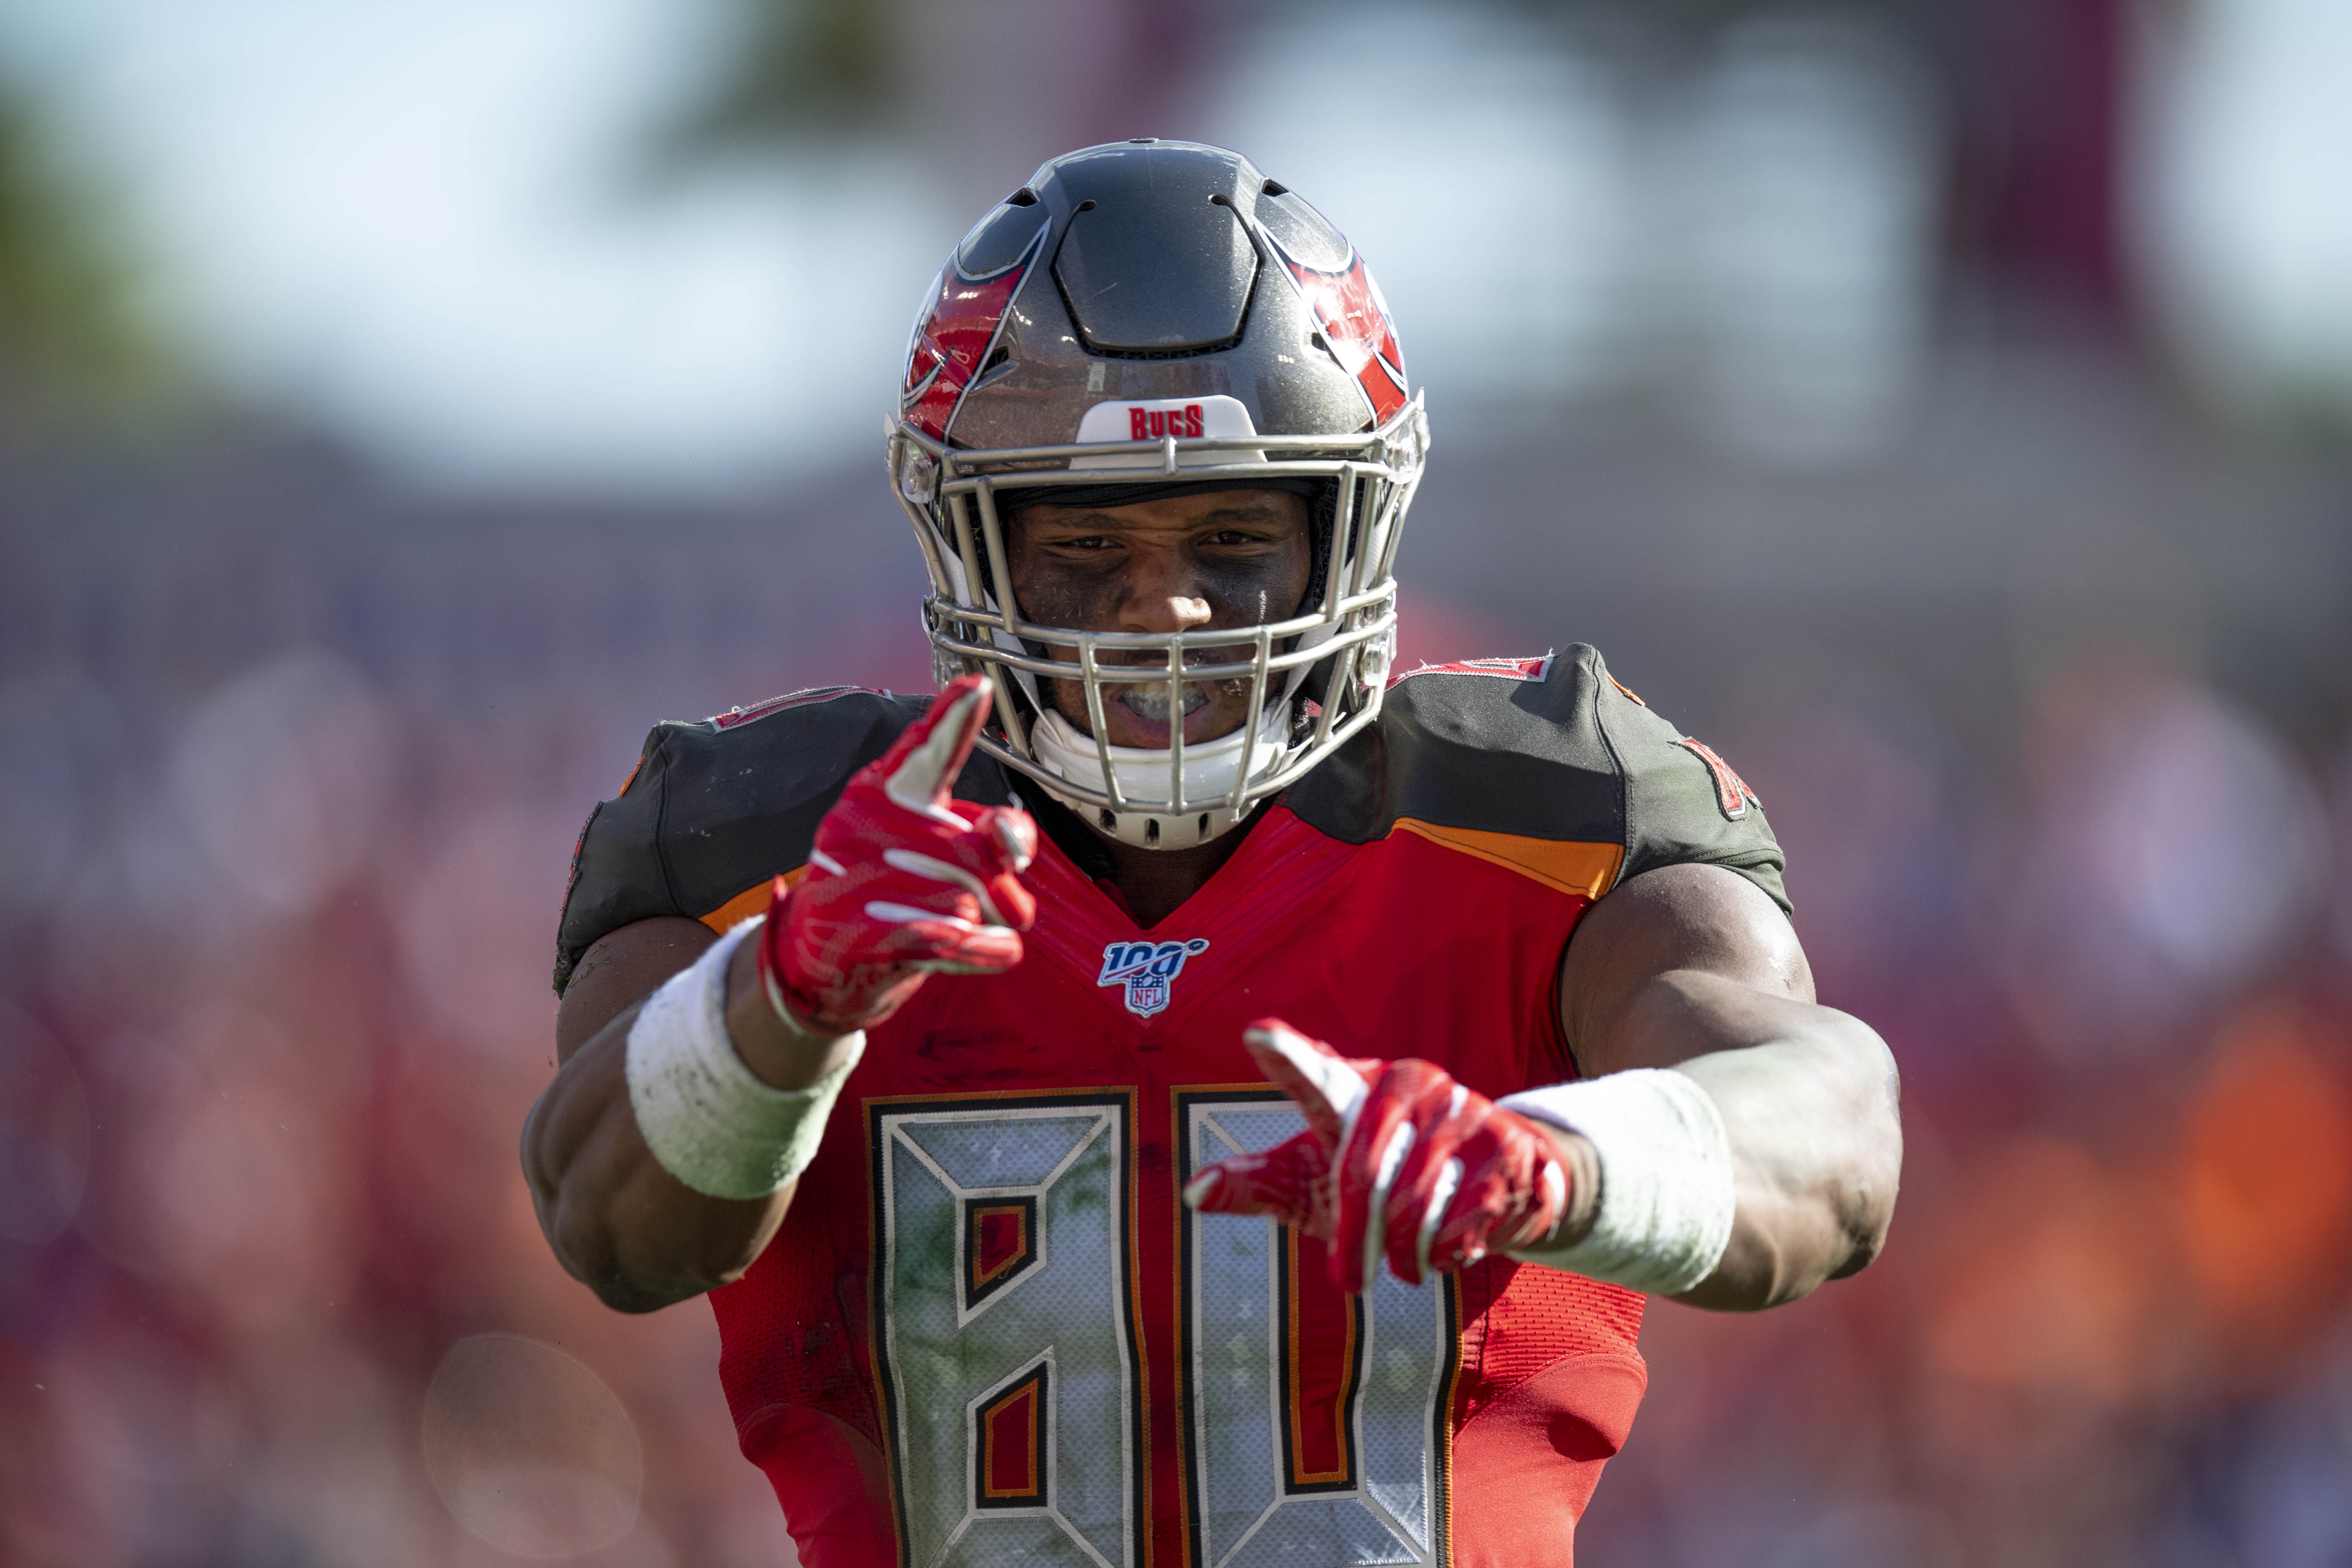 Report: Bucs will trade O.J. Howard for 'substantial' return